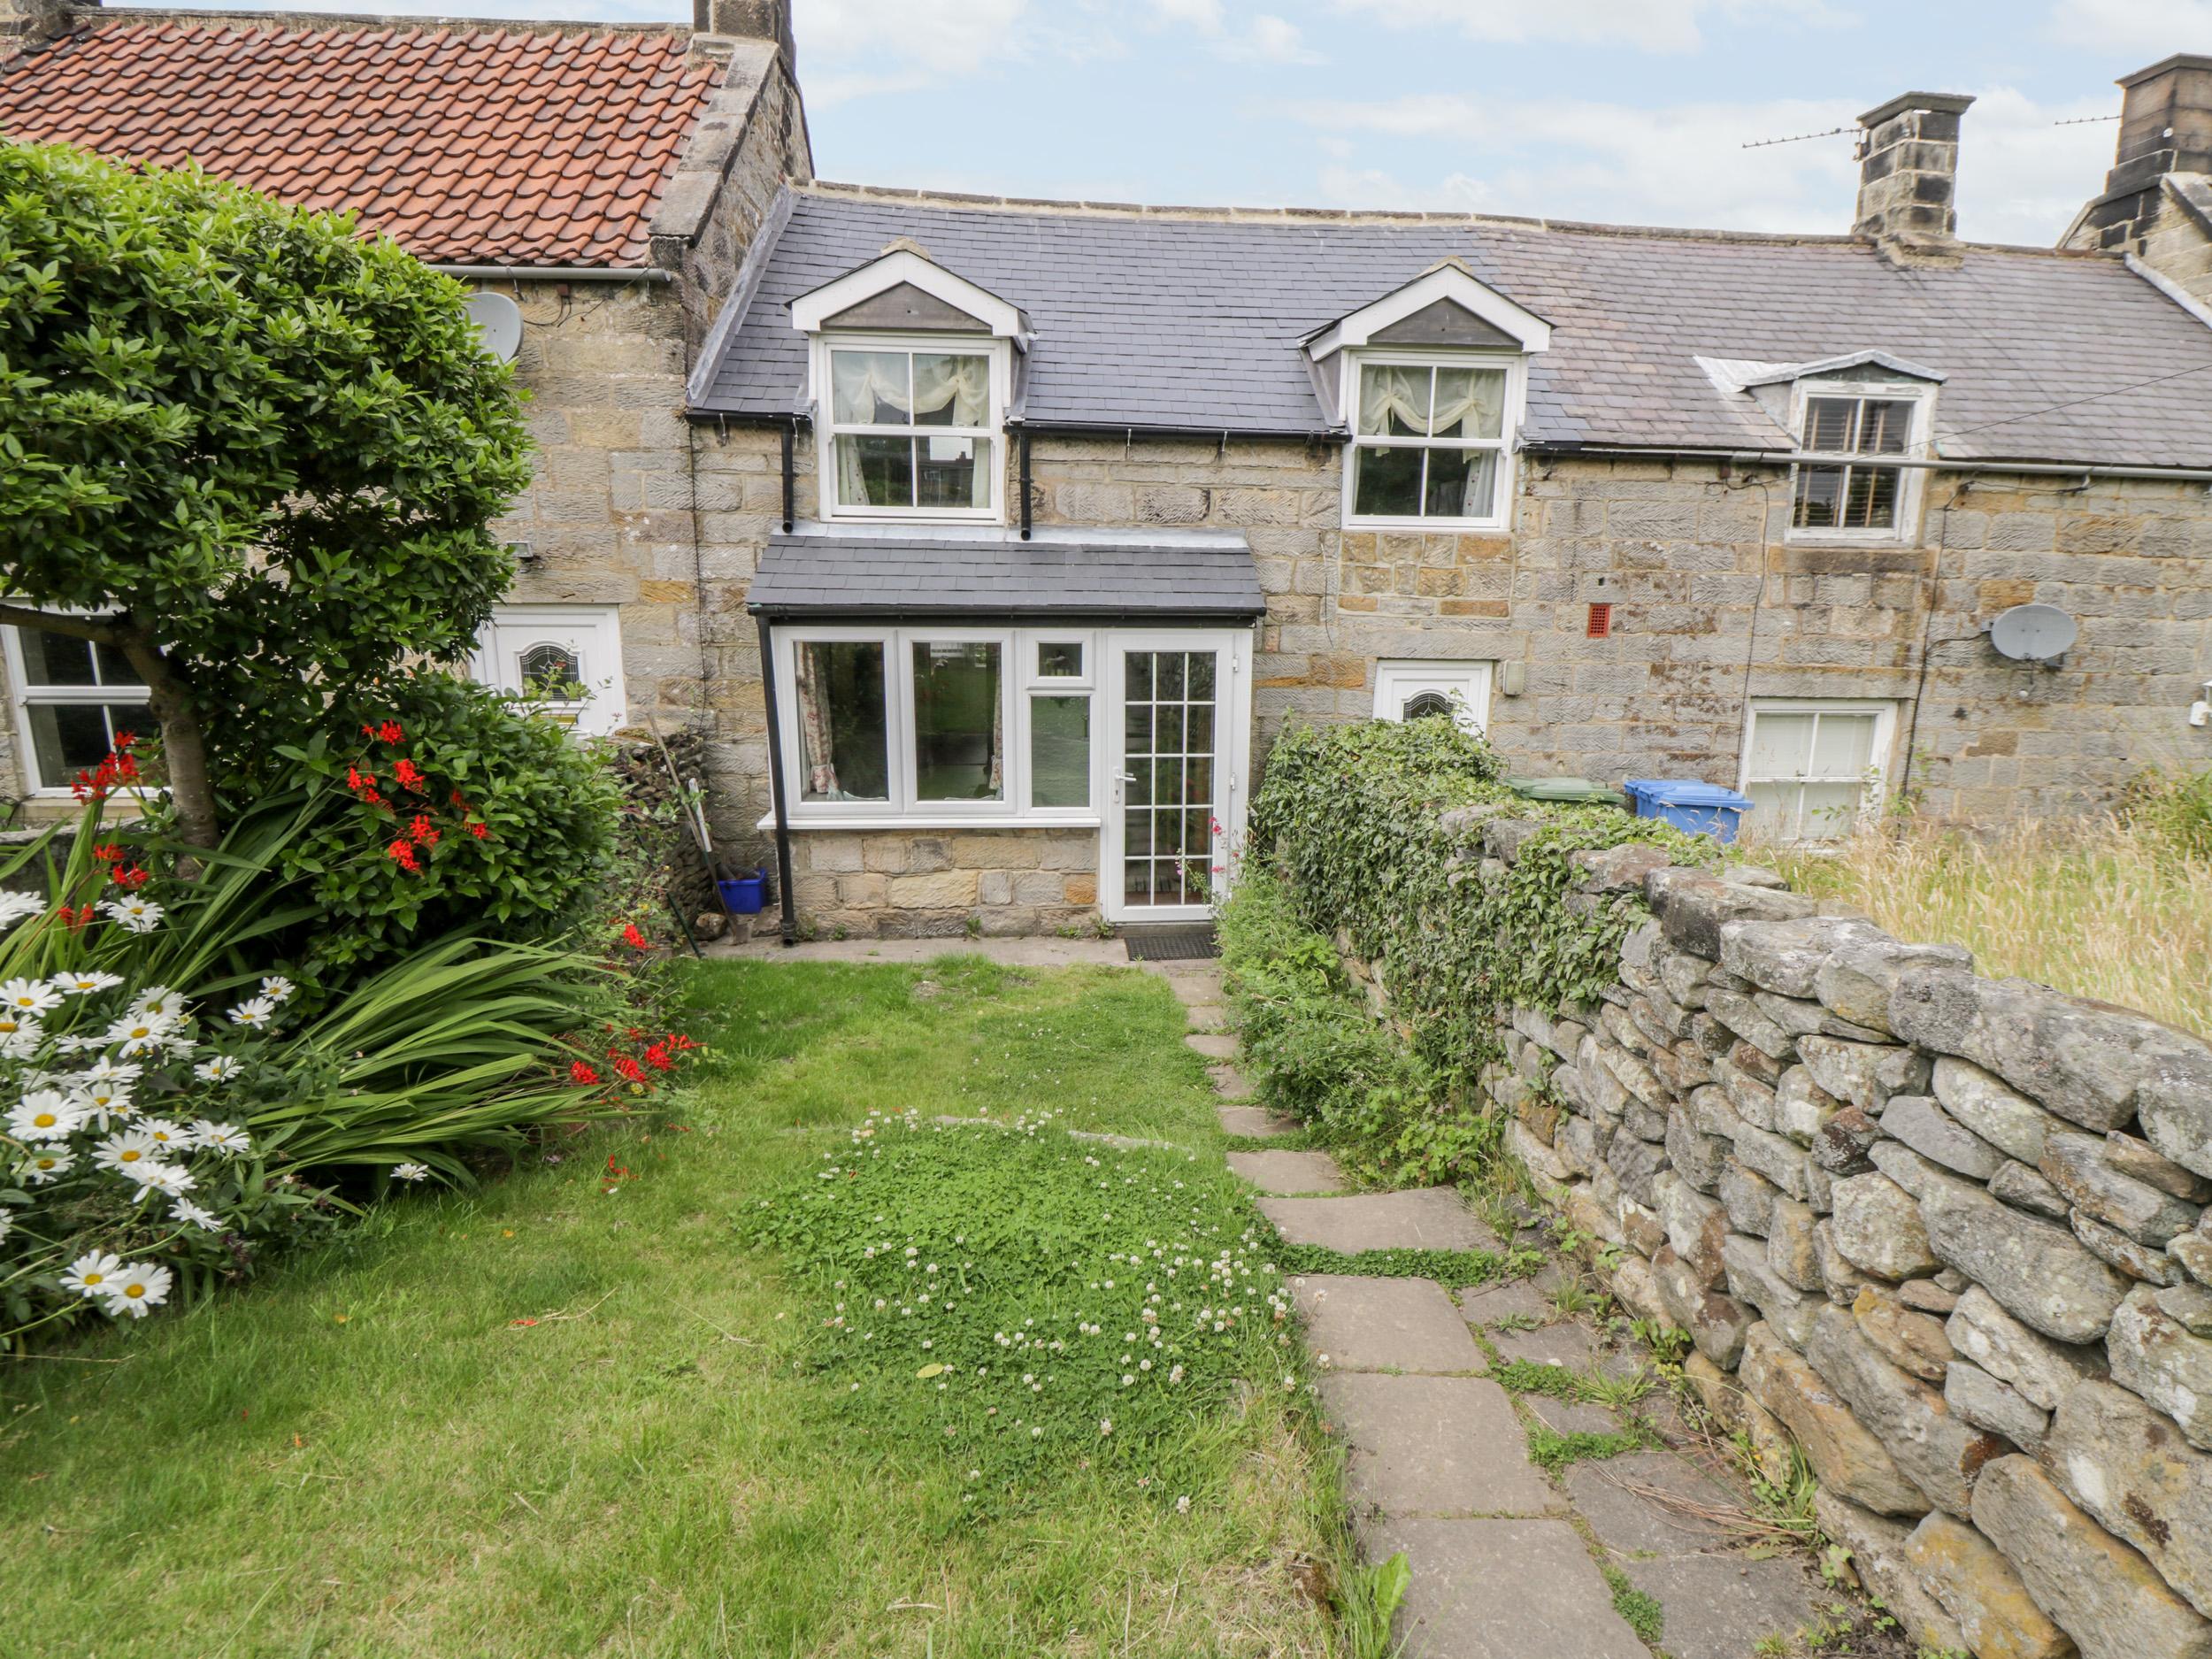 Holiday Cottage Reviews for 7 Lilac Terrace - Self Catering Property in Whitby, North Yorkshire